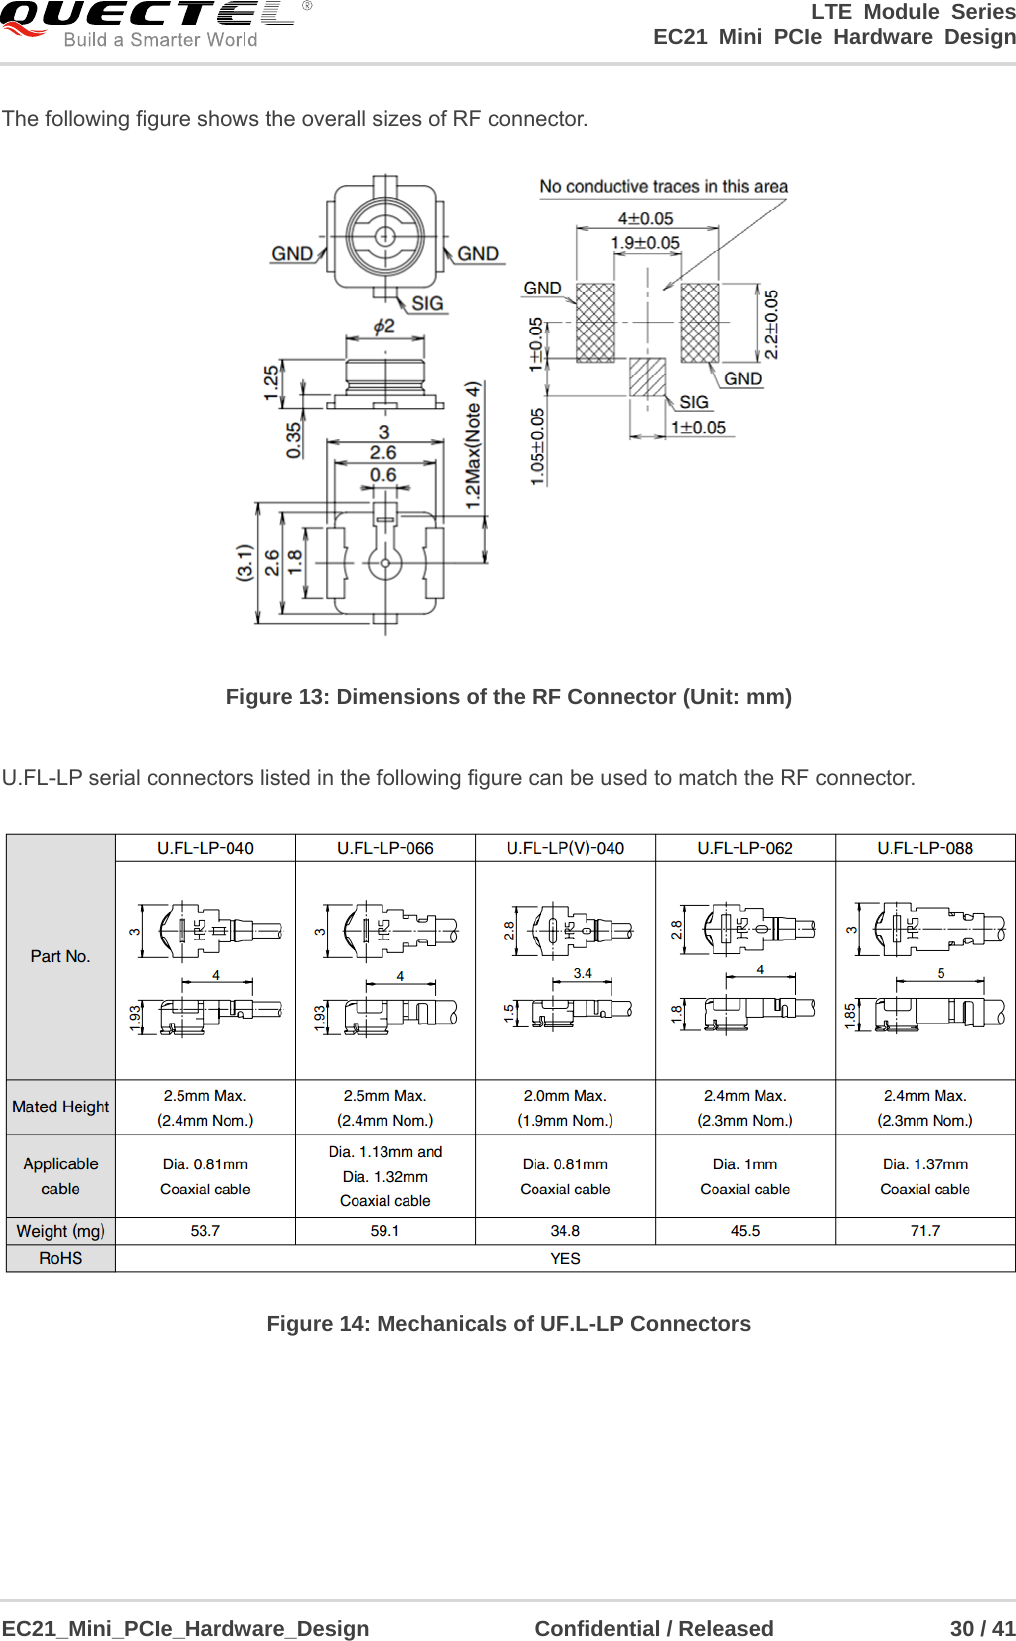                                                                        LTE Module Series                                                            EC21 Mini PCIe Hardware Design  EC21_Mini_PCIe_Hardware_Design               Confidential / Released                30 / 41    The following figure shows the overall sizes of RF connector.  Figure 13: Dimensions of the RF Connector (Unit: mm)    U.FL-LP serial connectors listed in the following figure can be used to match the RF connector.    Figure 14: Mechanicals of UF.L-LP Connectors 